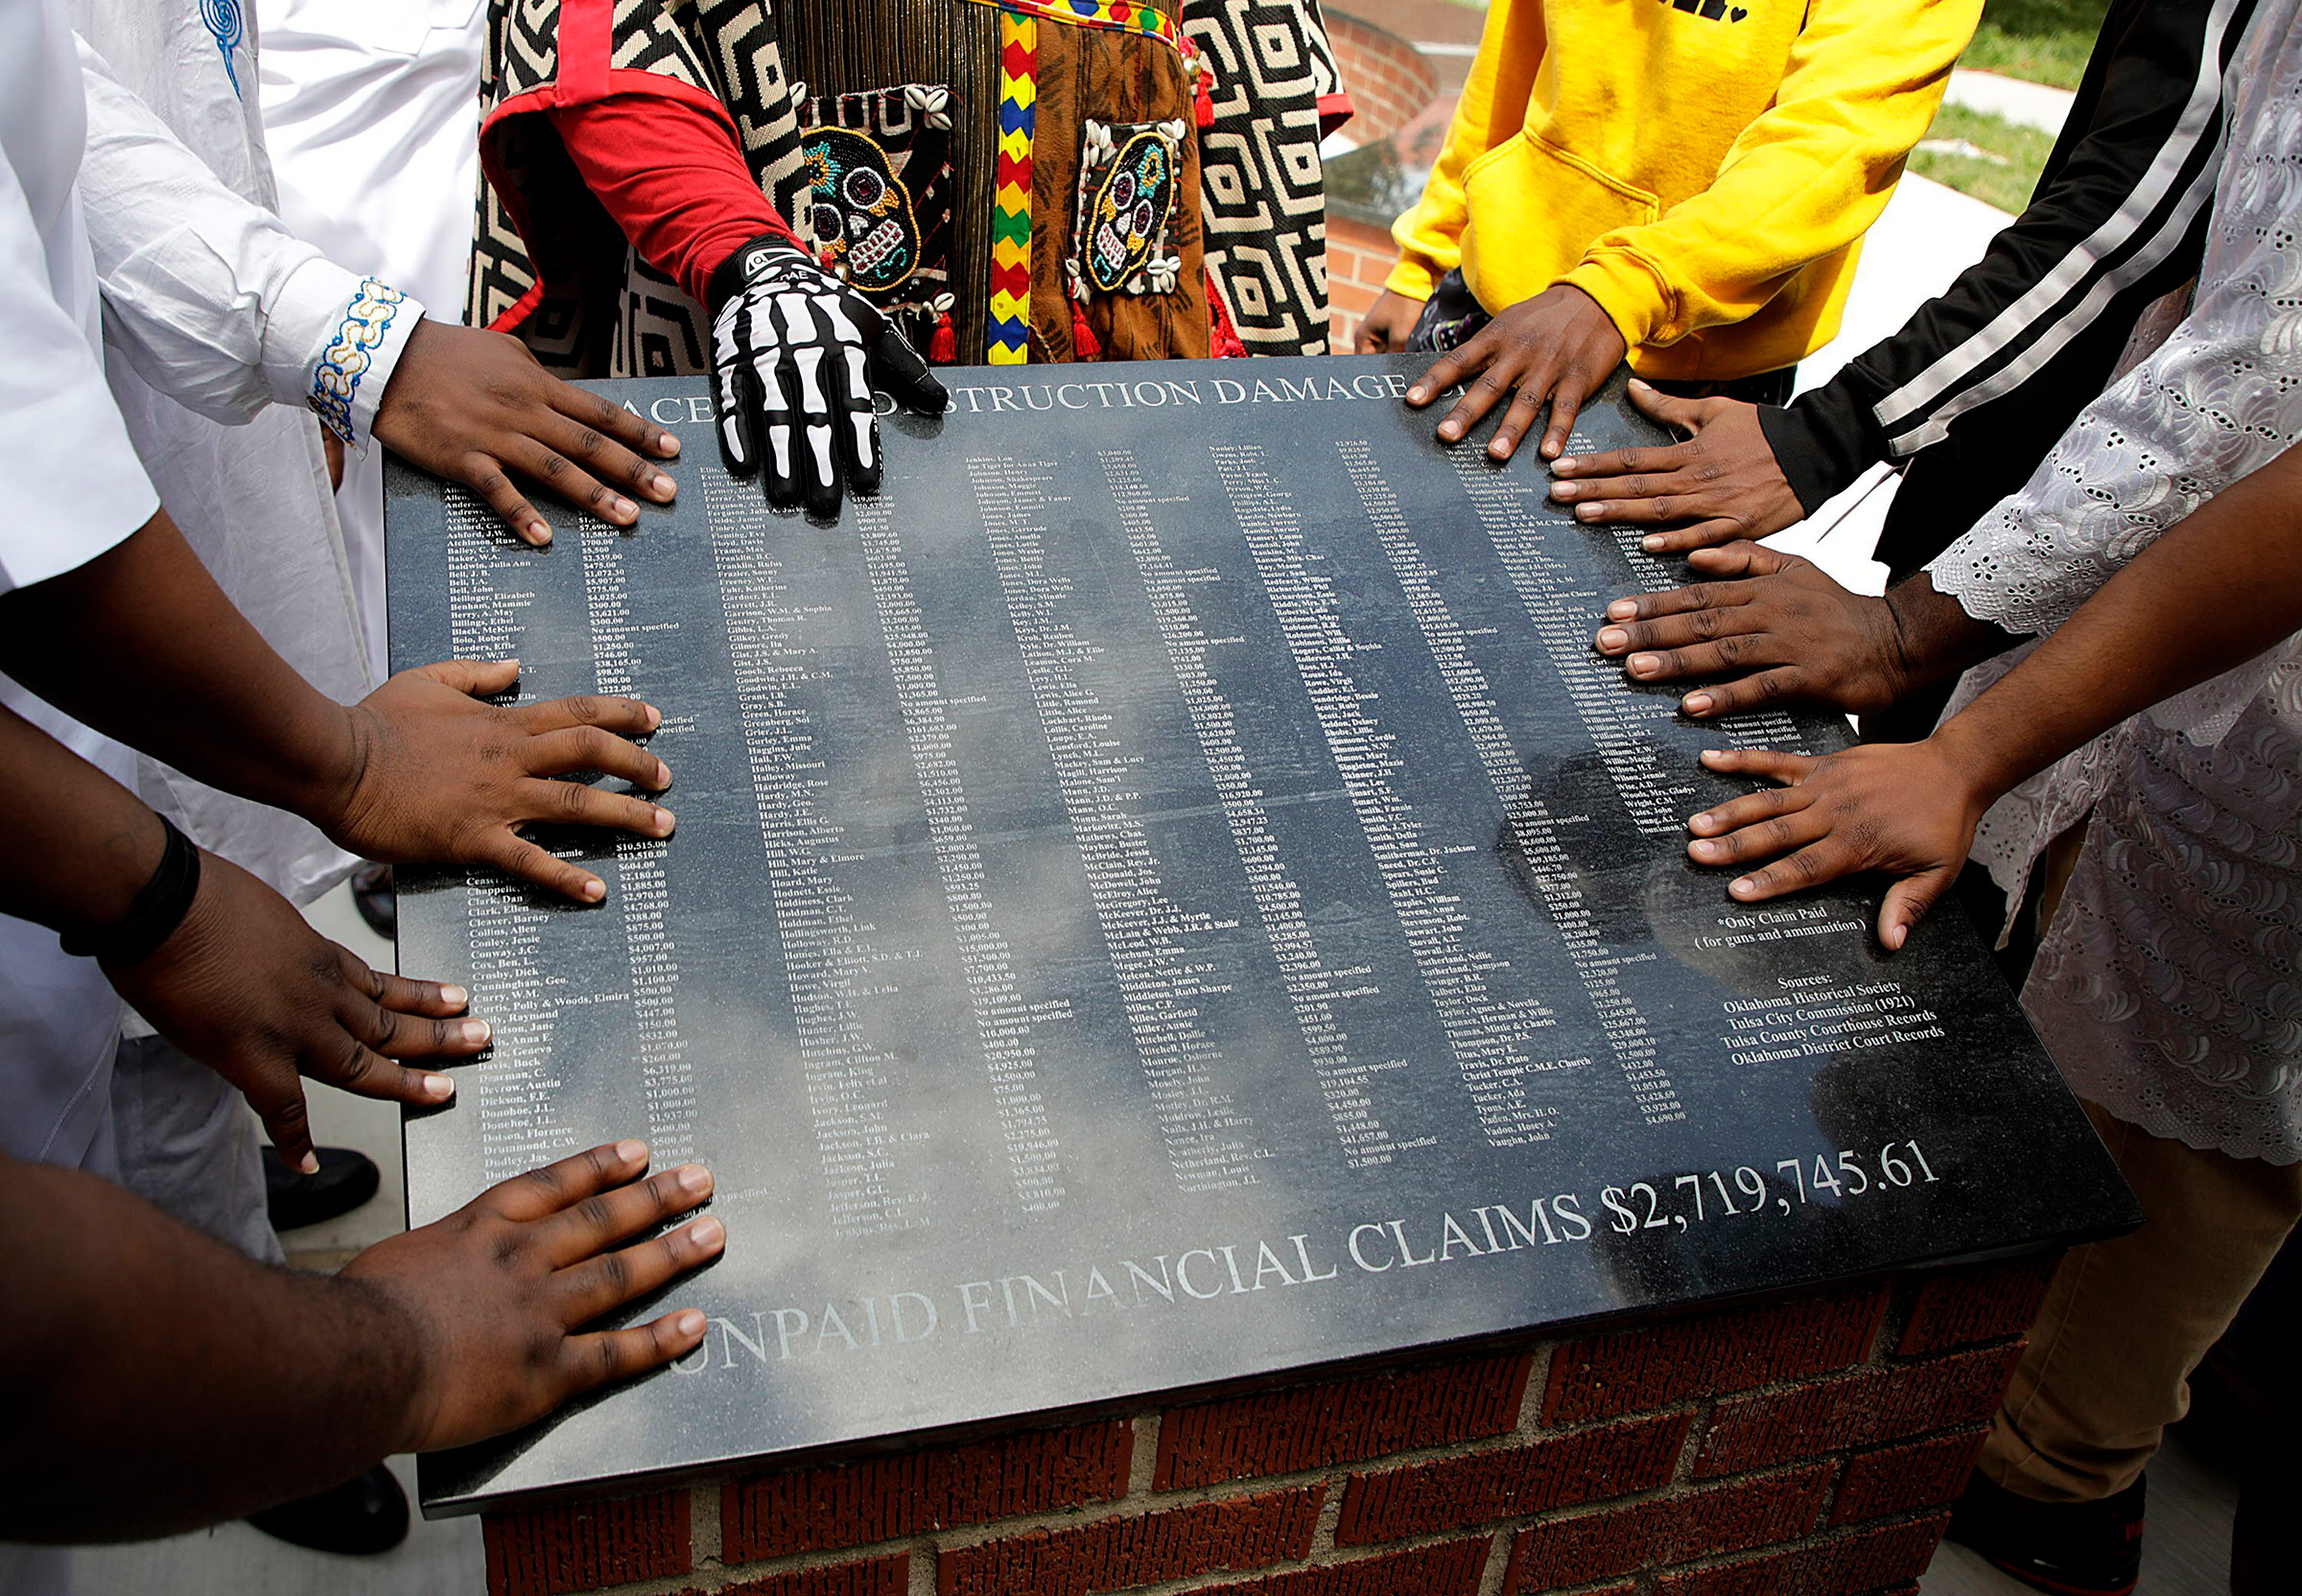 Members of the African Ancestral Society touch the 1921 Black Wall Street Memorial during the Black Wall Street Memorial March in Tulsa on May 28, 2021. (Mike Simons—Tulsa World/AP)